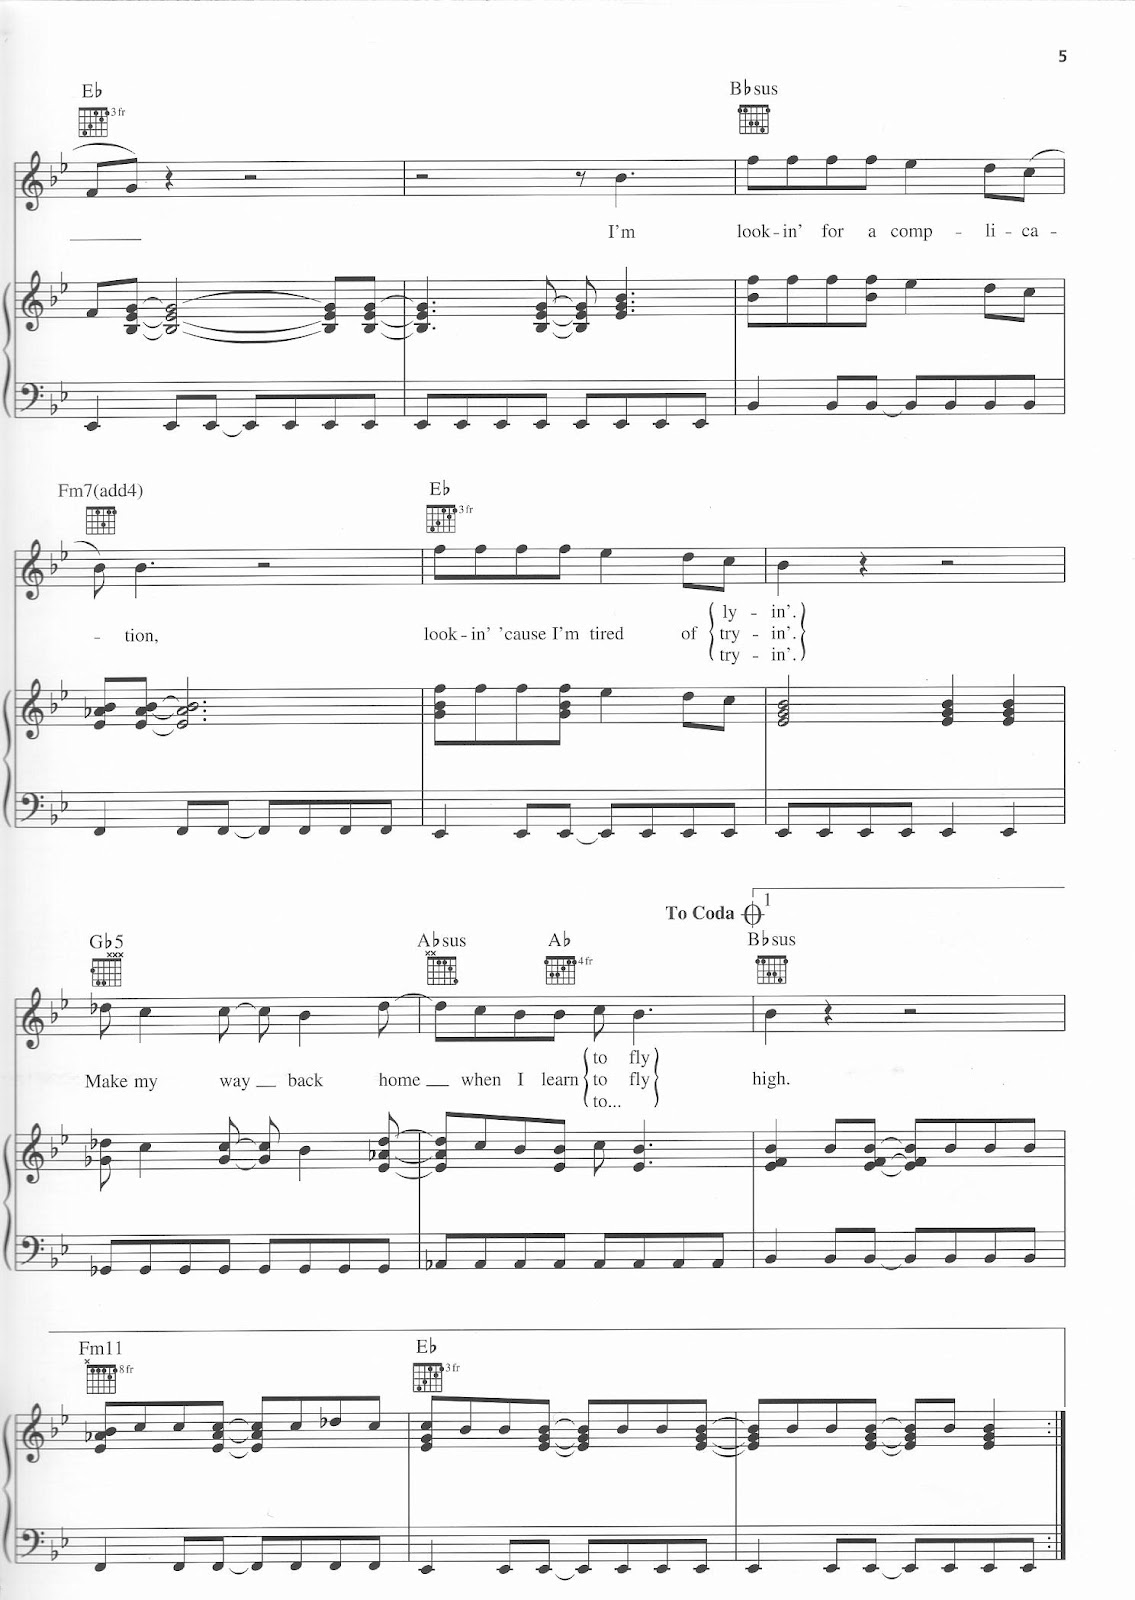 ☆ Foo Fighters-Learn To Fly Sheet Music pdf, - Free Score Download ☆